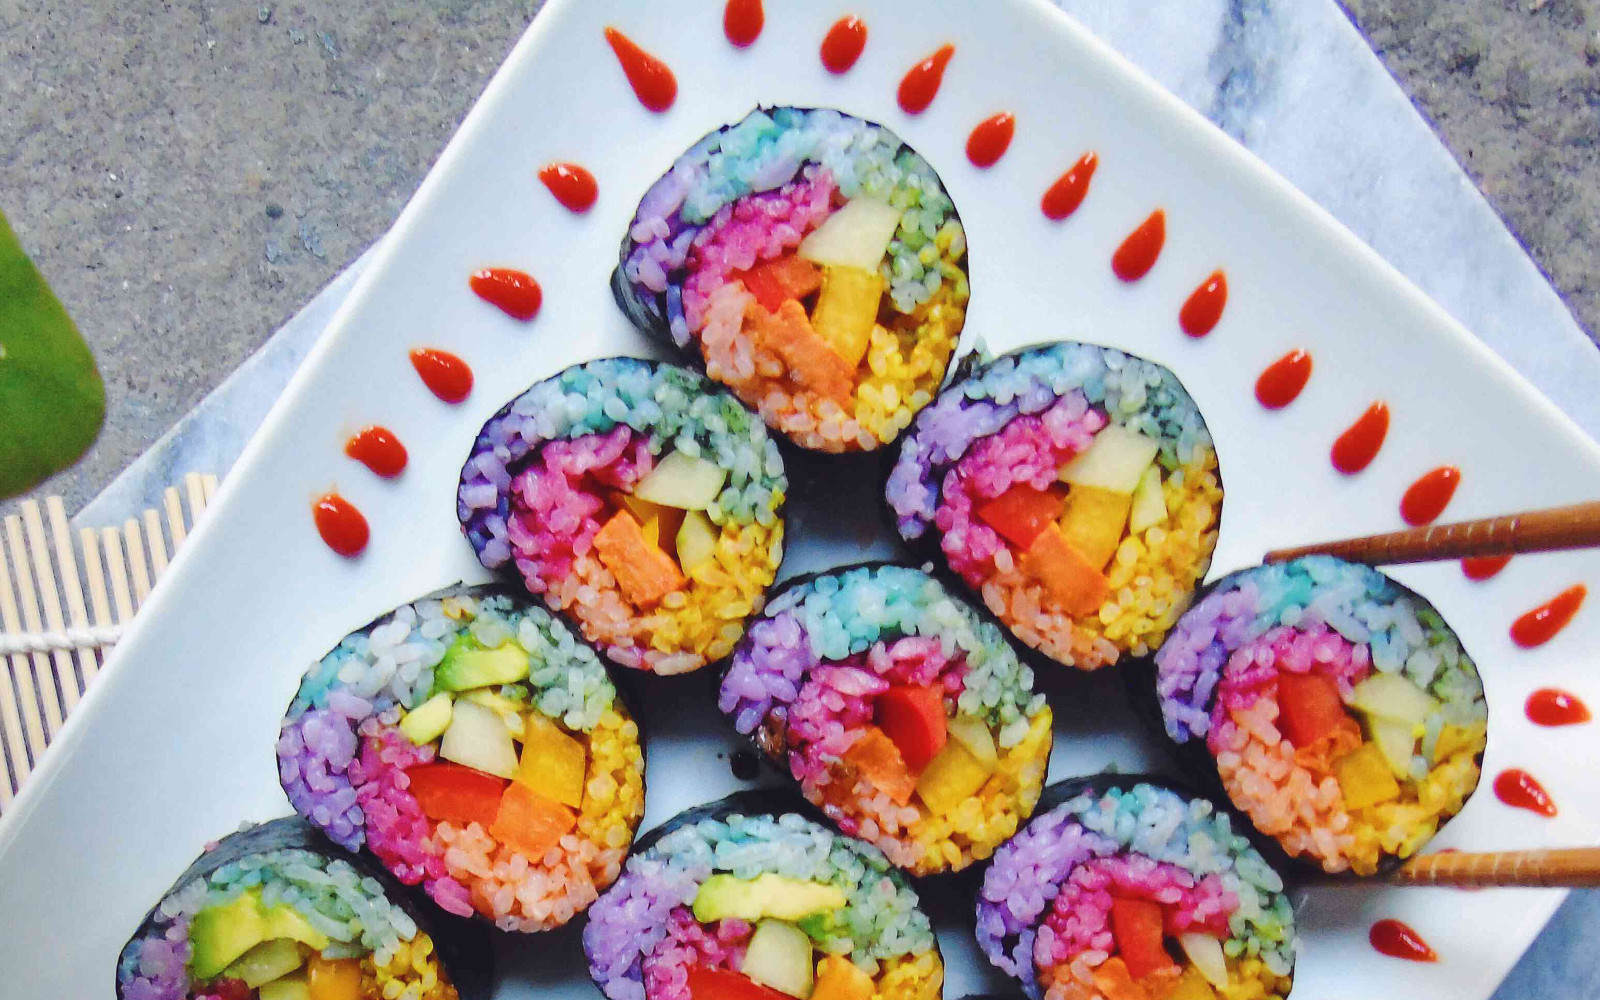 Healthy Unicorn Party Food Ideas
 This Healthy Rainbow Unicorn Food Will Be Your New